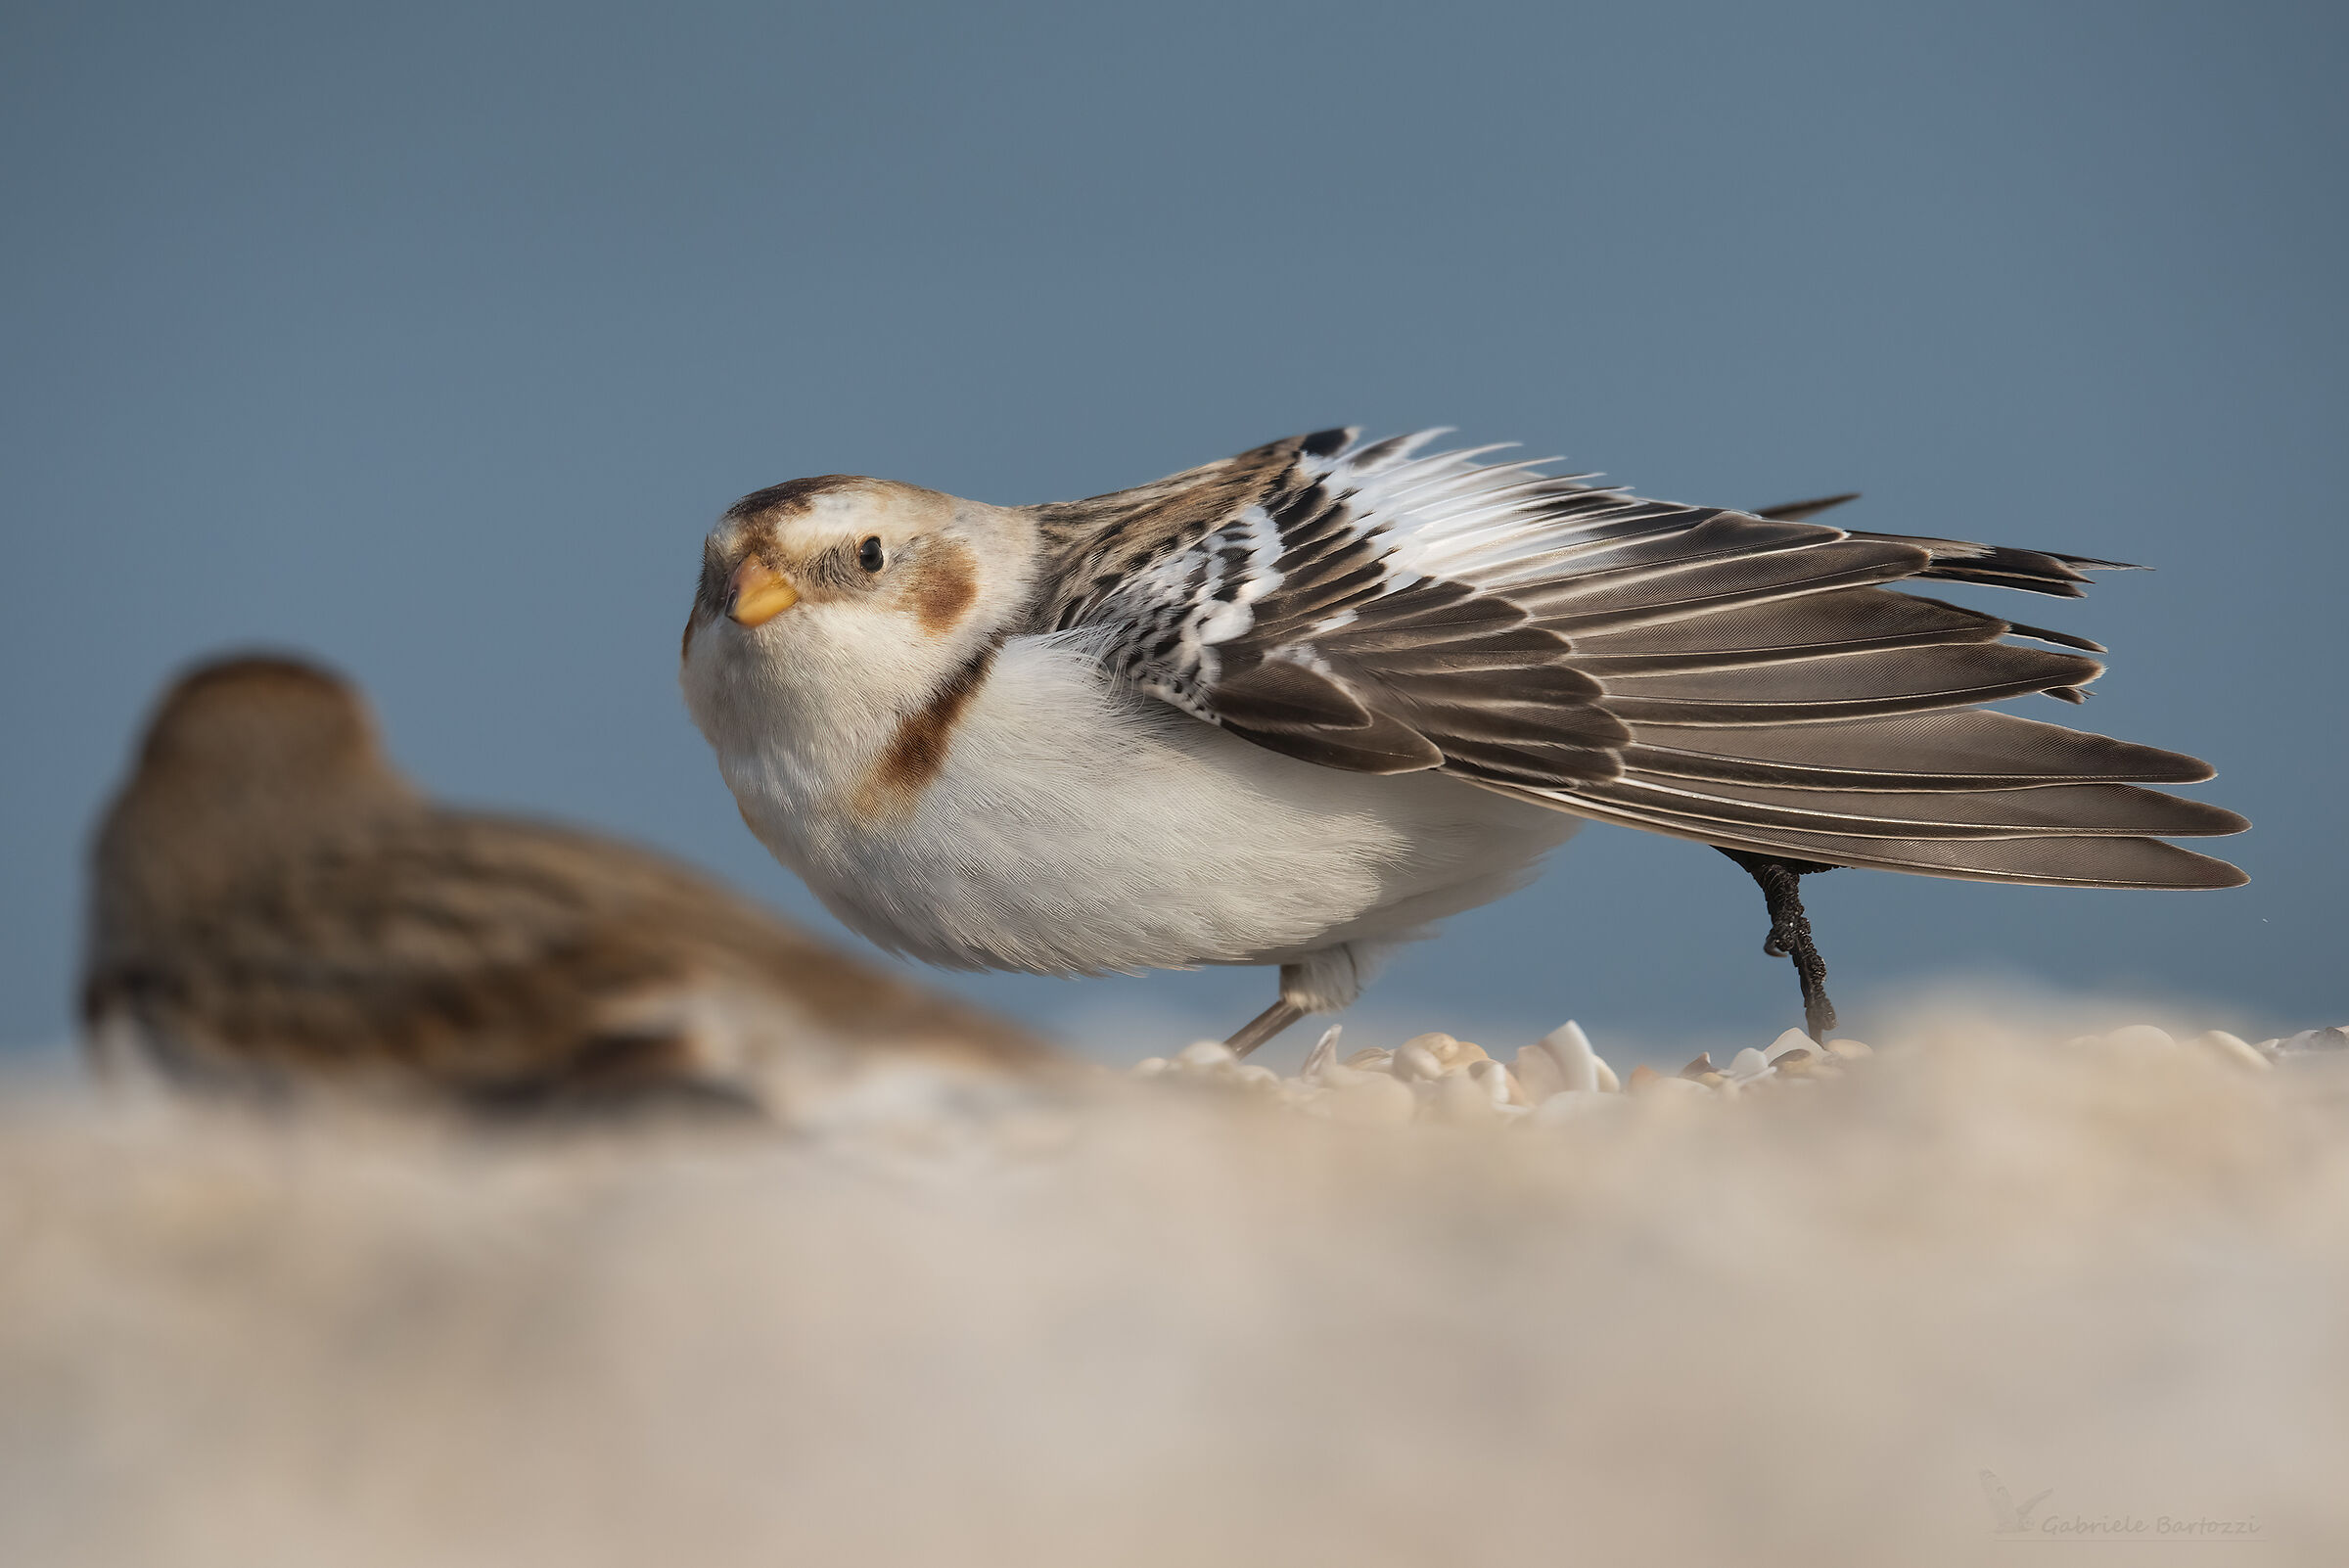 What do you say I'm beautiful? ... snow bunting ...